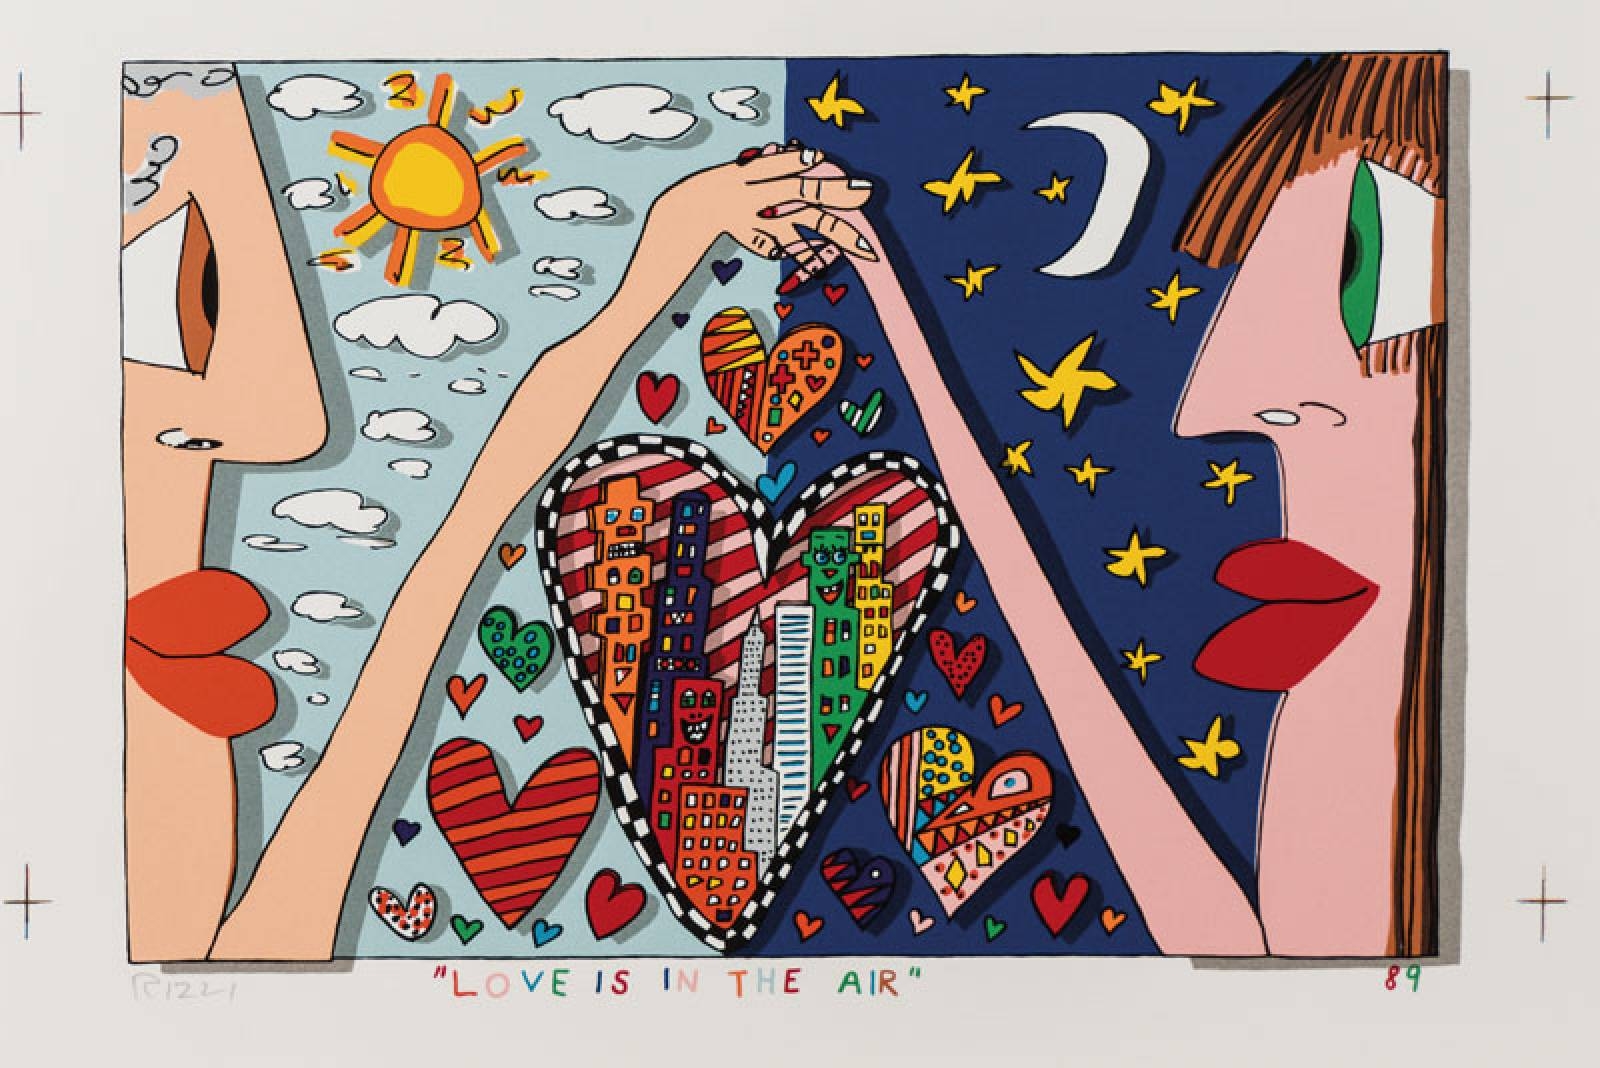 Love is in the air by James Rizzi, 1989